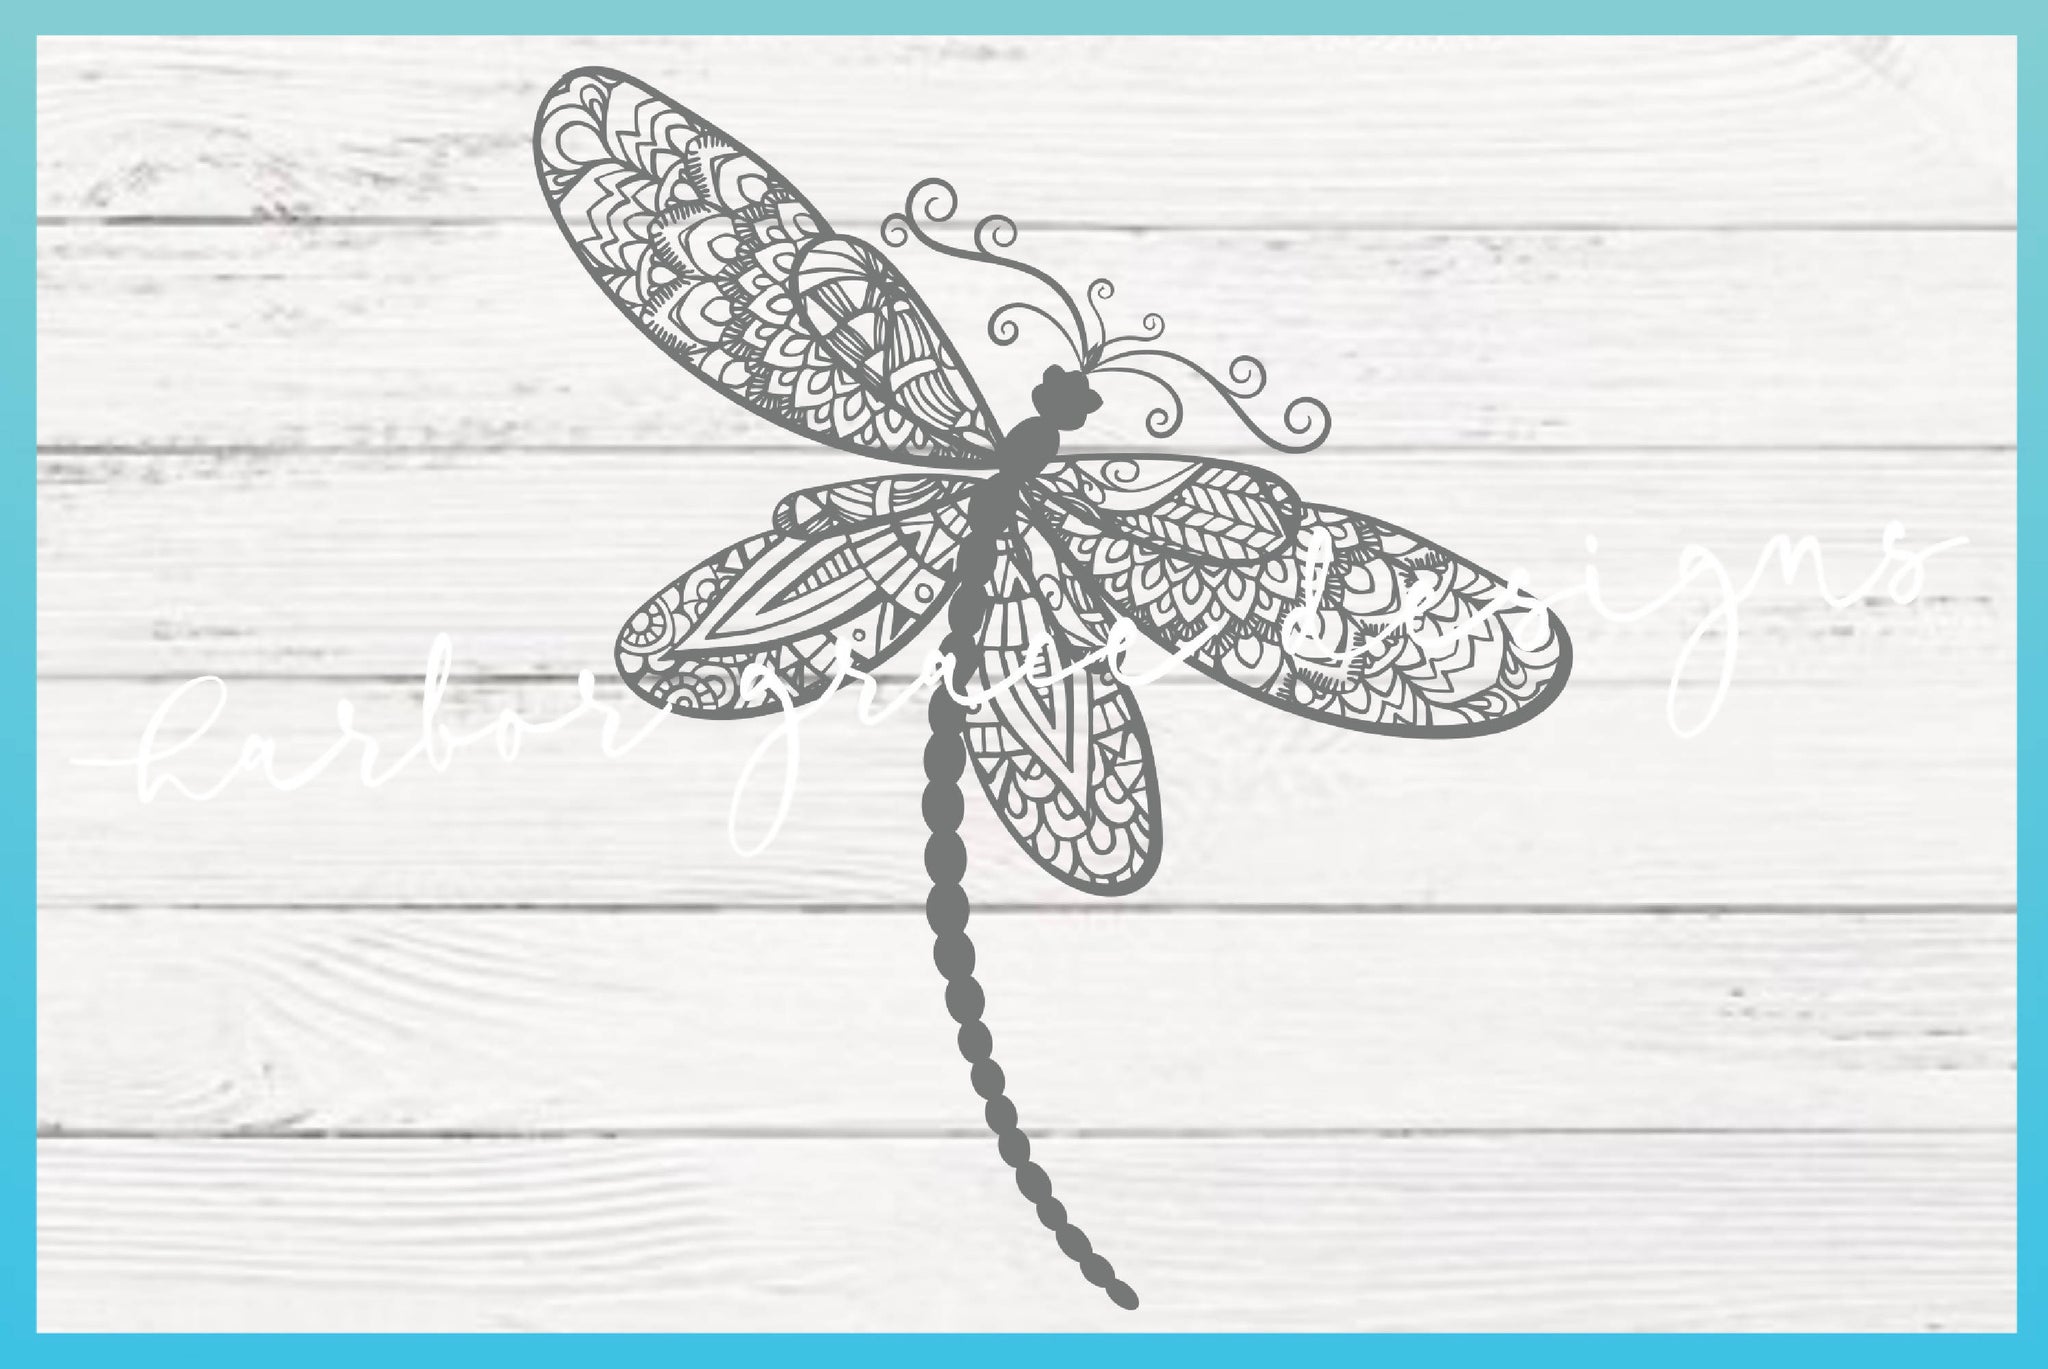 Stencils Templates Dragonfly Svg Dragonfly Mandala Svg Zentangle Dragonfly Butterfly Mandala Svg Dragonfly Clipart Dragonfly Vector Dragonfly Birthday Svg Drawing Drafting